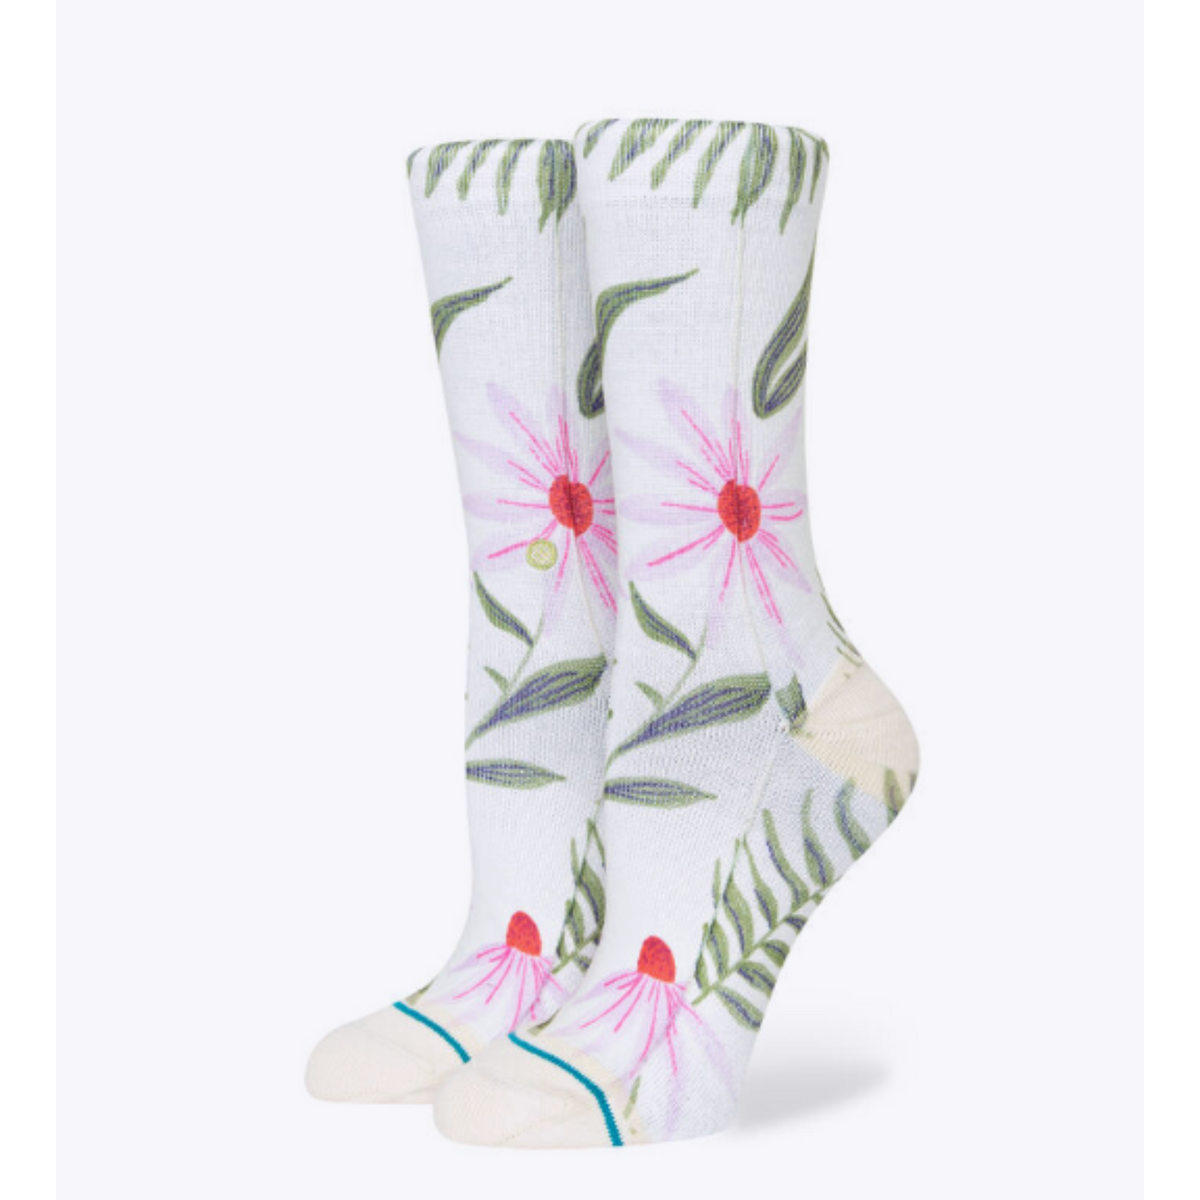 Stance Flaunt women&#39;s crew sock featuring white sock with pink flowers and green leaves and stems. Socks shown on display feet. 